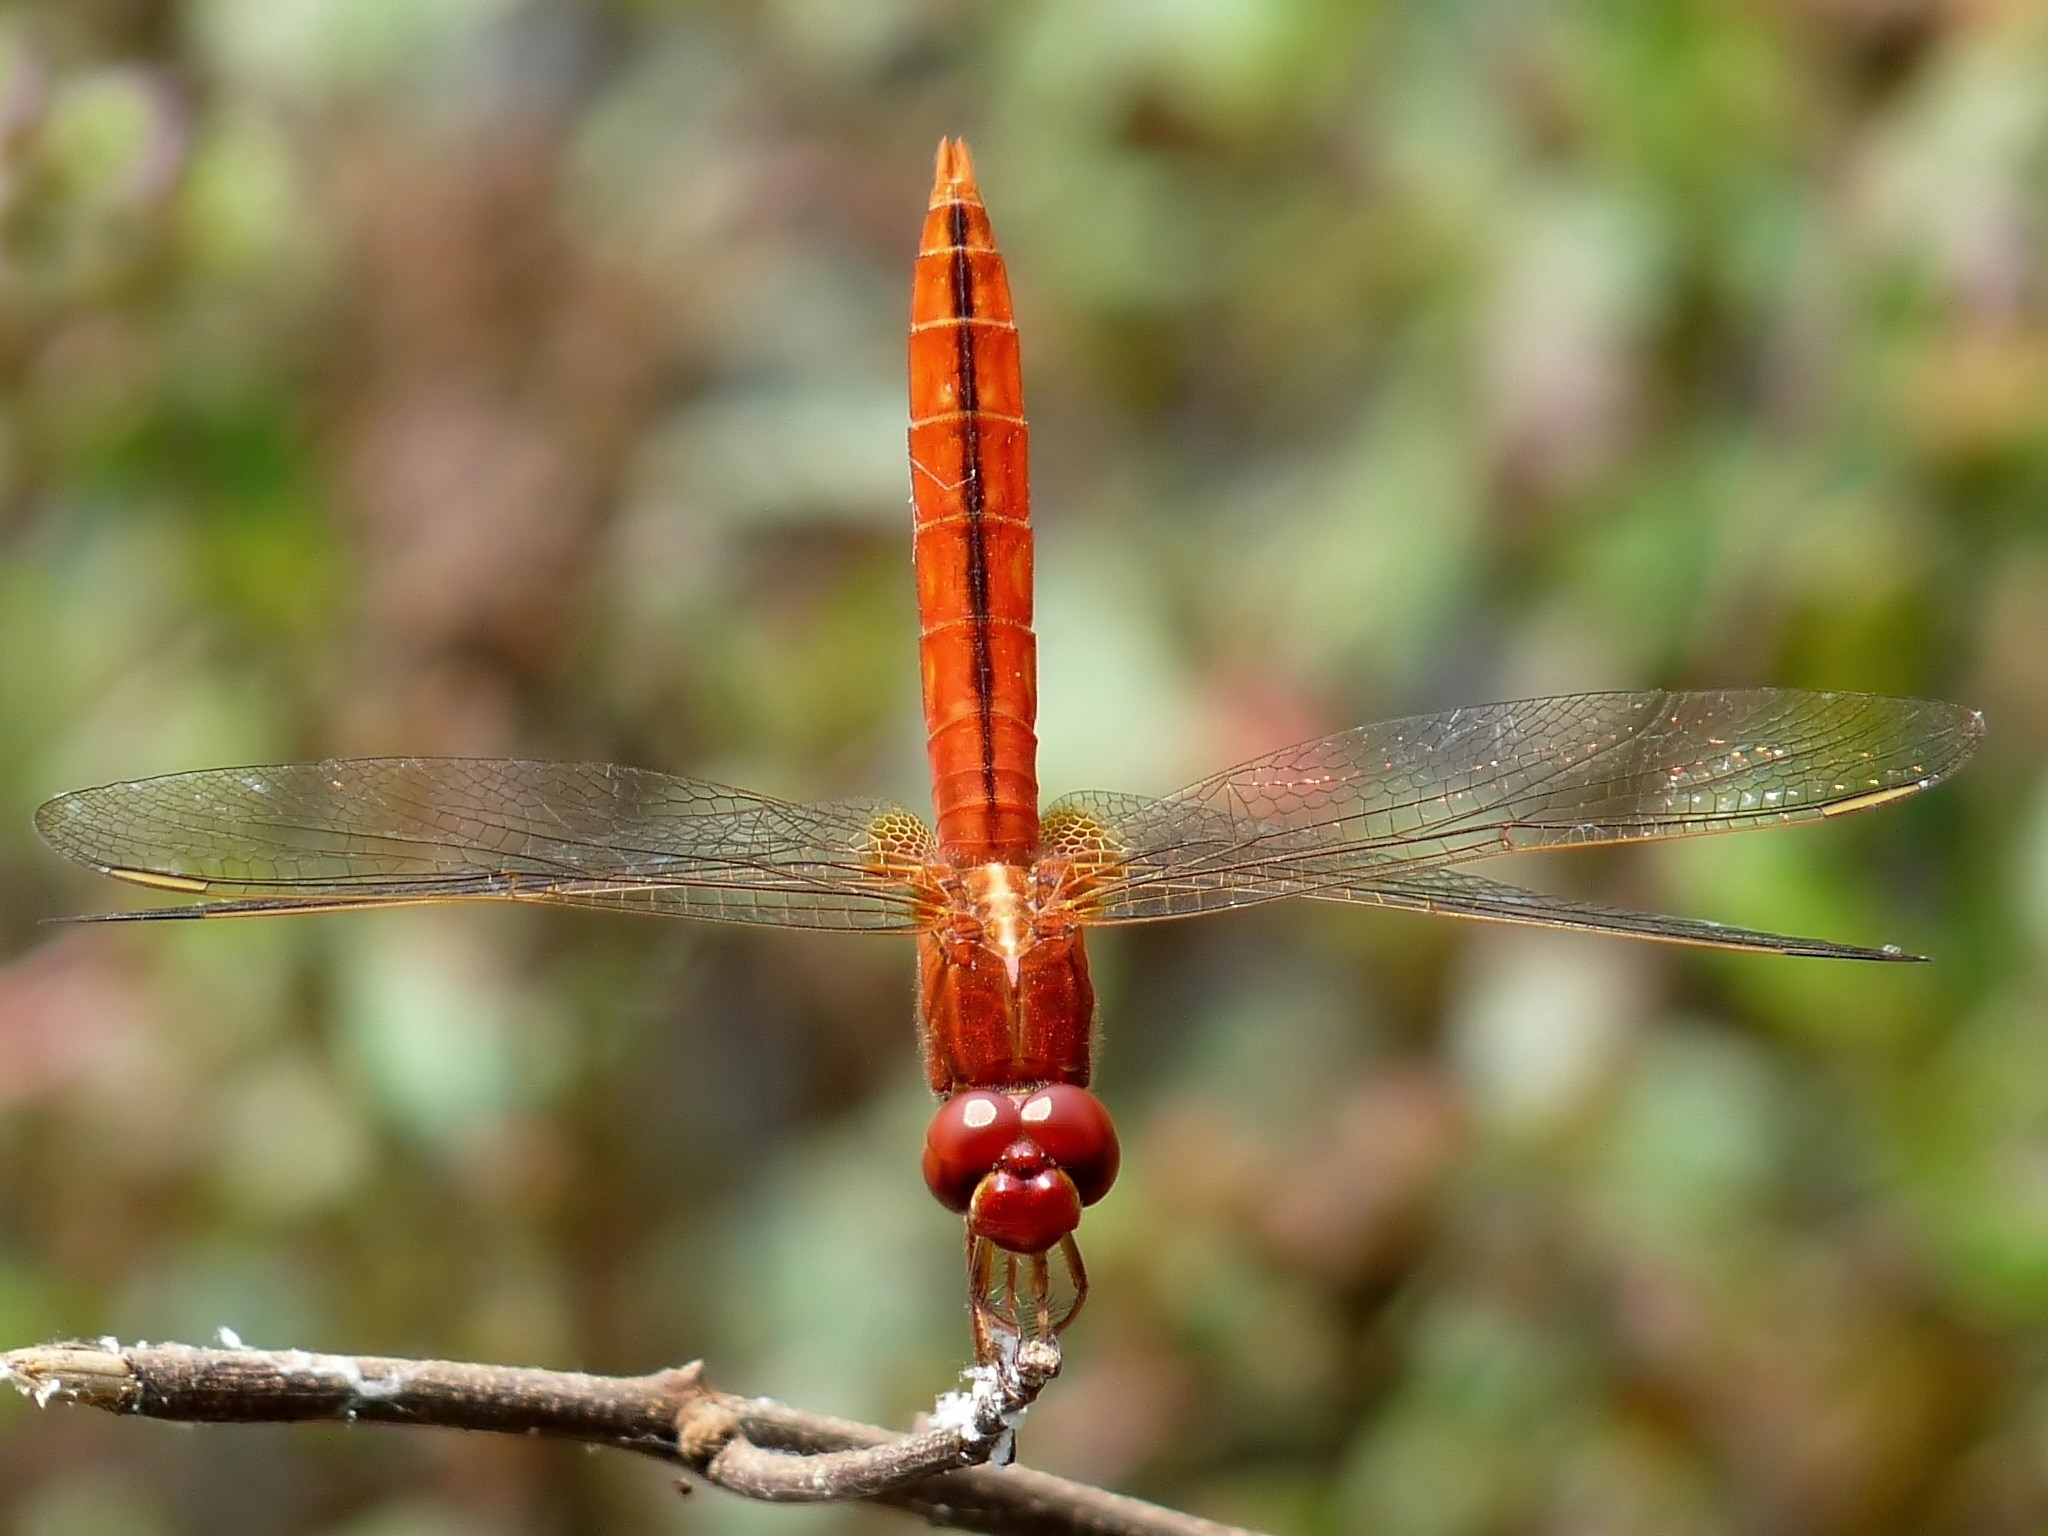 Insect, Crocothemis Servilla, Dragonfly, focus on foreground, day